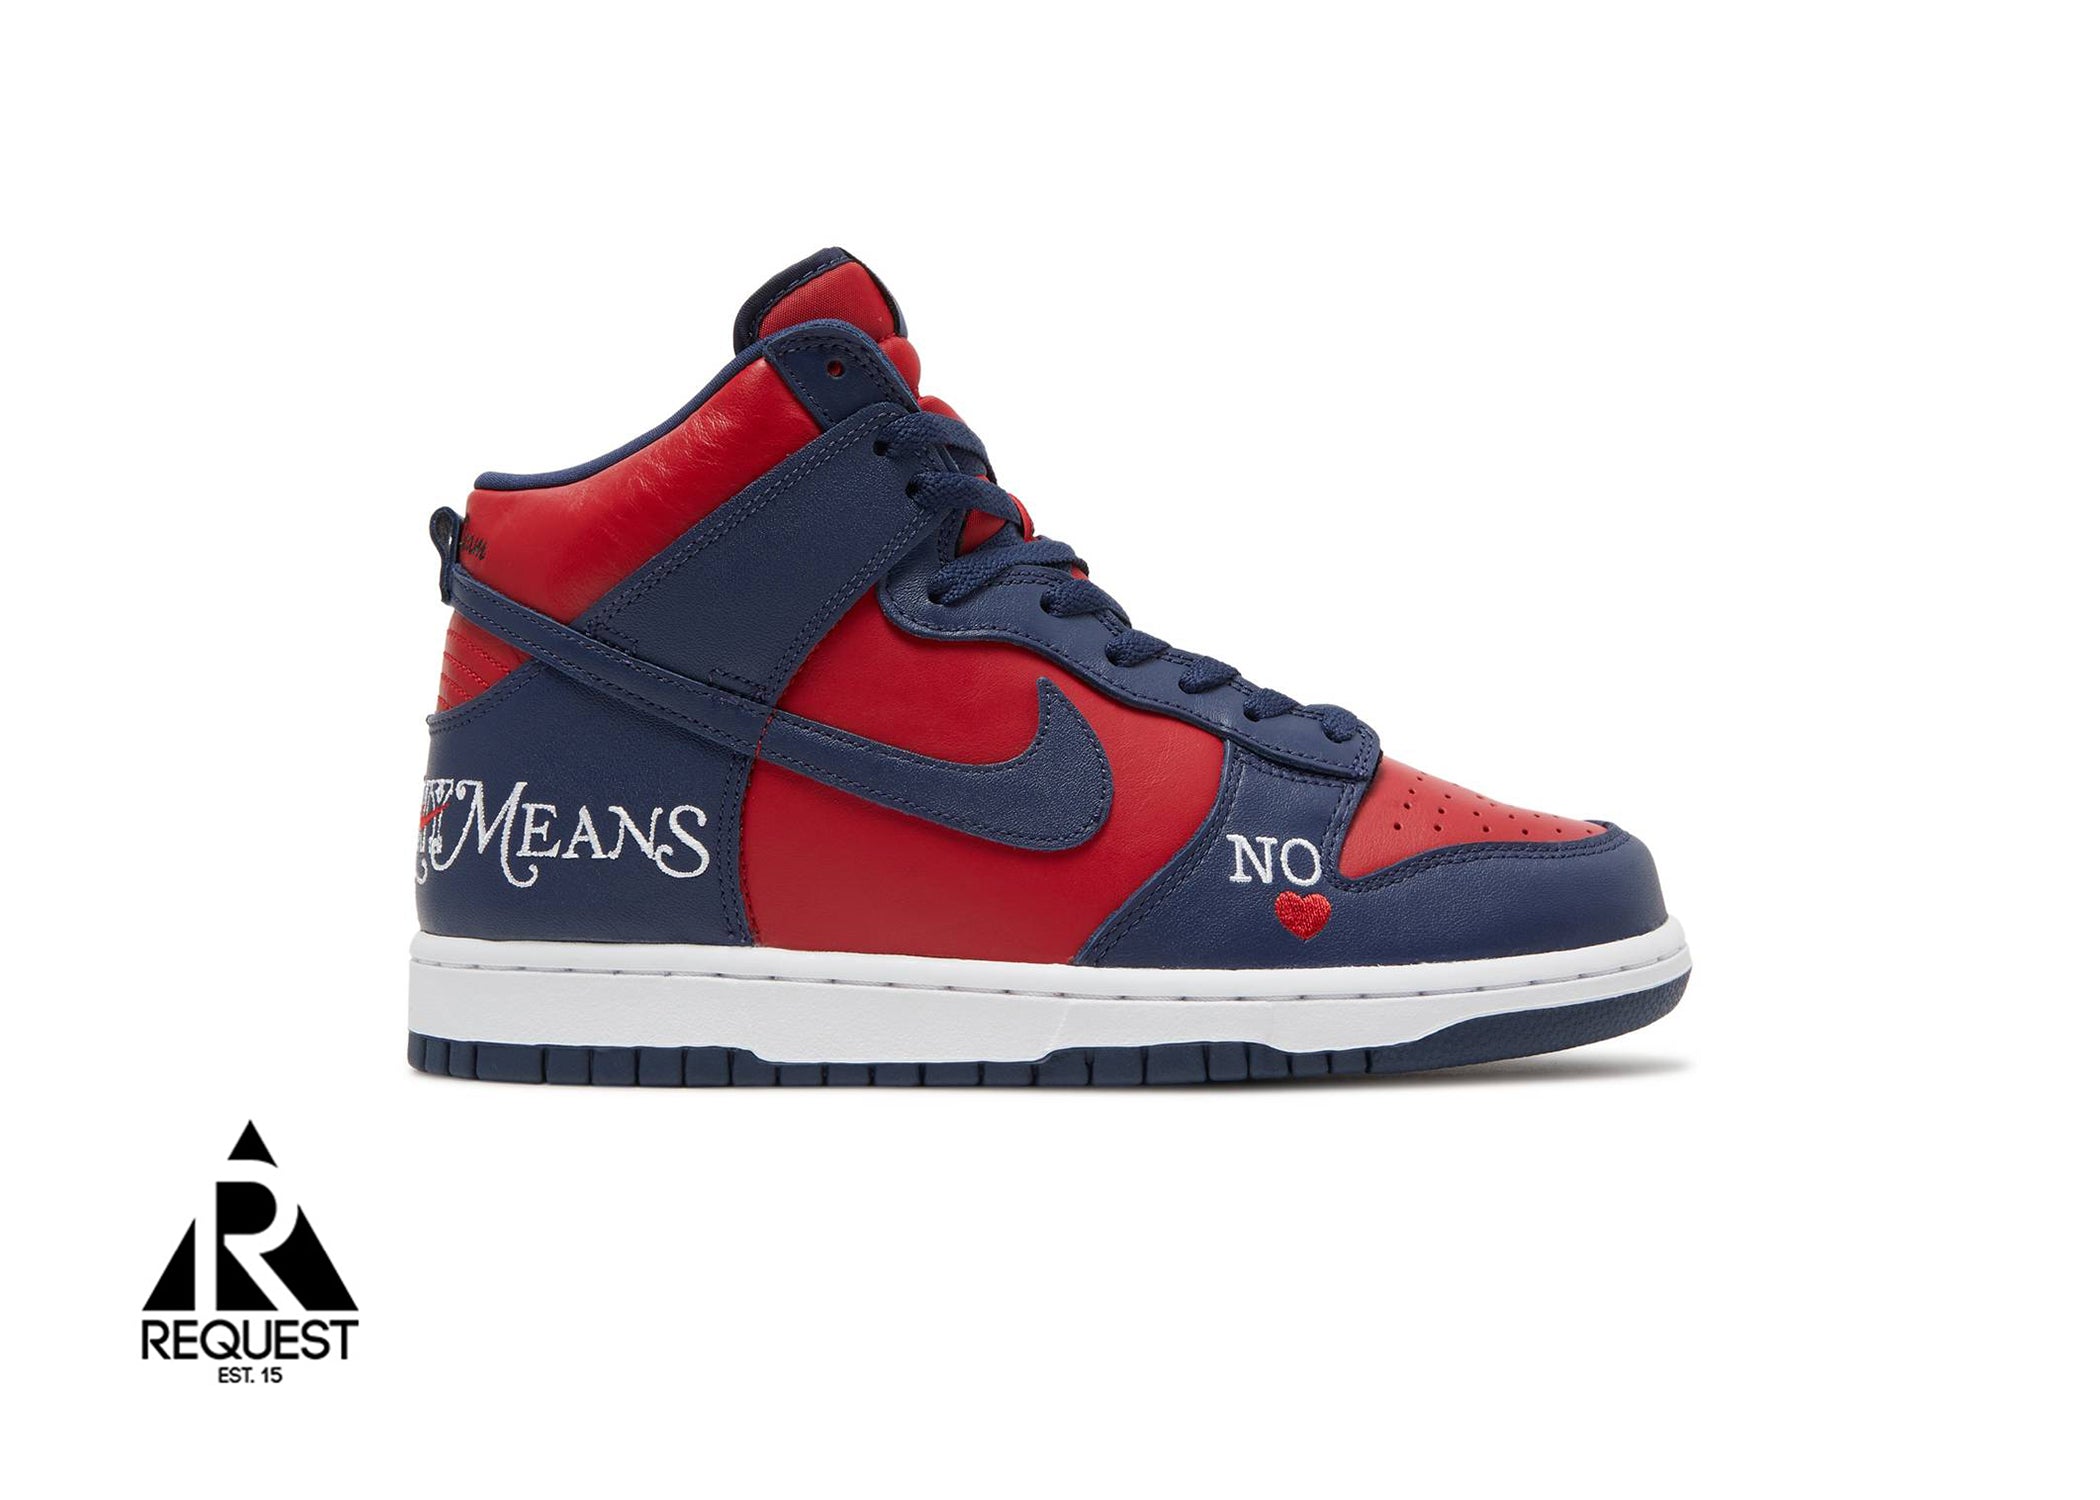 Nike SB Dunk High “Supreme By Any Means Navy”